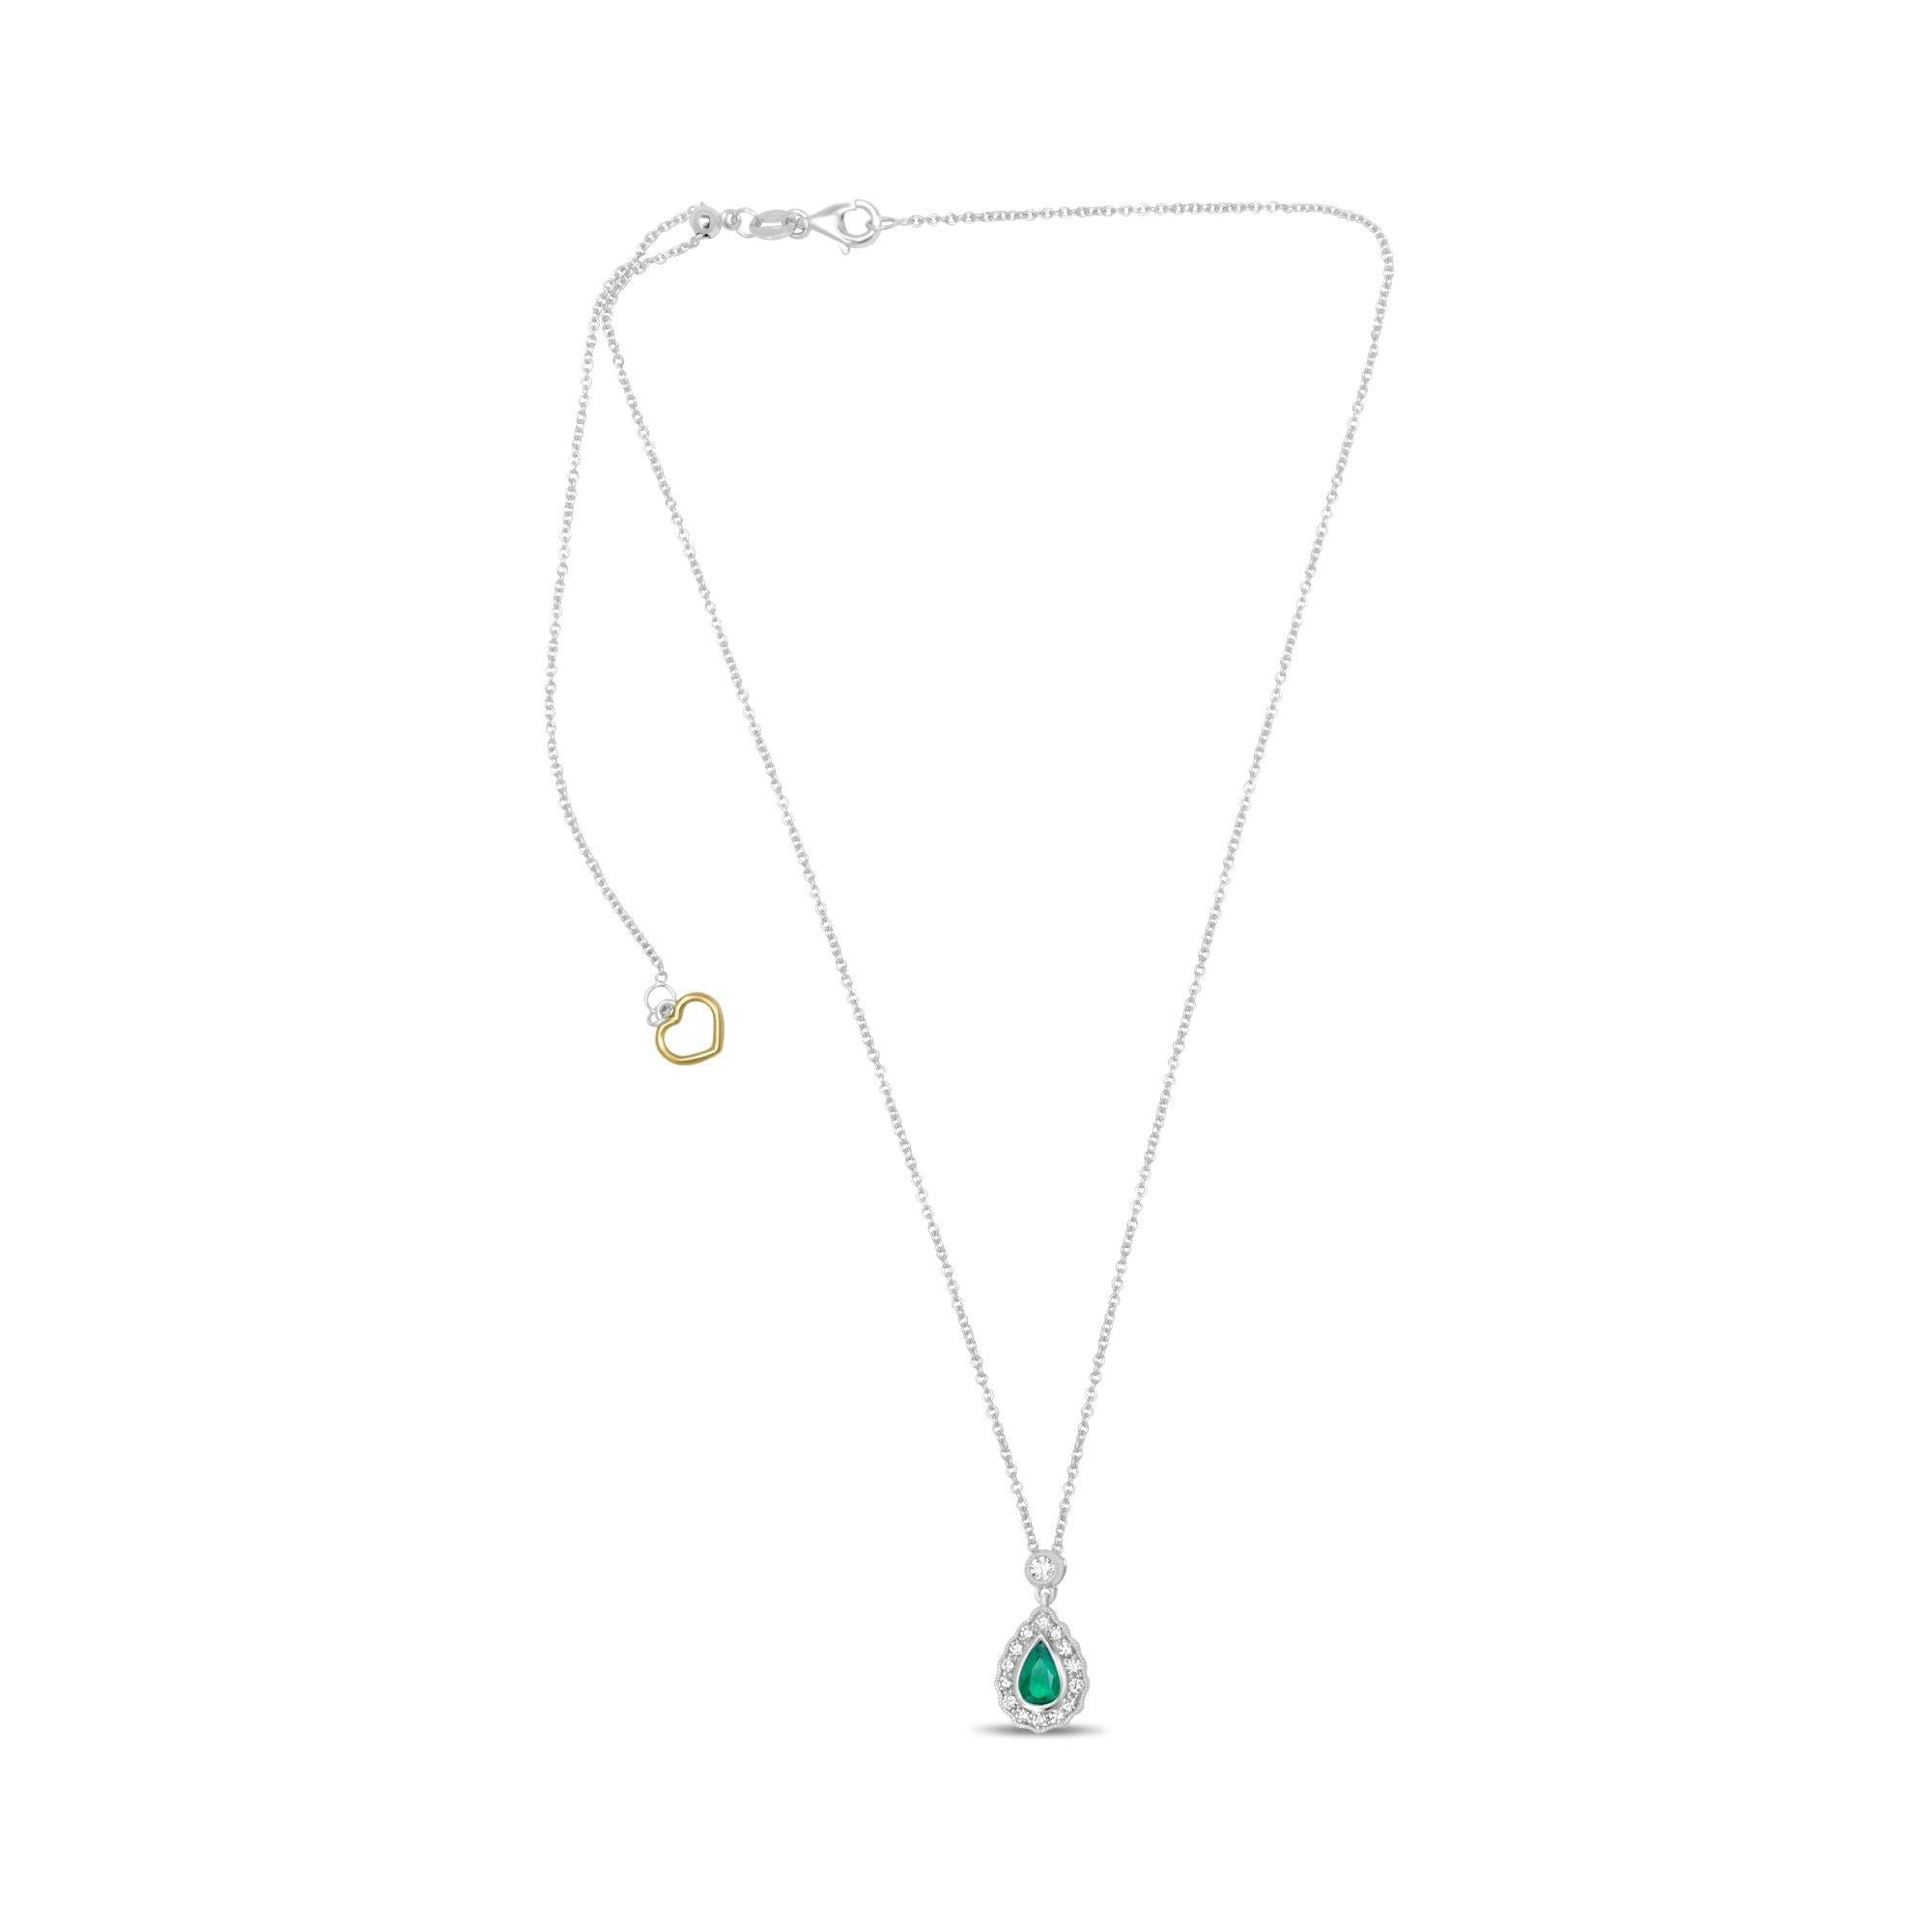 This 18 karat white gold necklace showcases a 0.58 carat, pear-shaped eye clean emerald accented by 0.25 carats of round cut white diamonds showcased in a stunning single halo ornamented by milgrain detailing. 

The luminous center stone sits in a